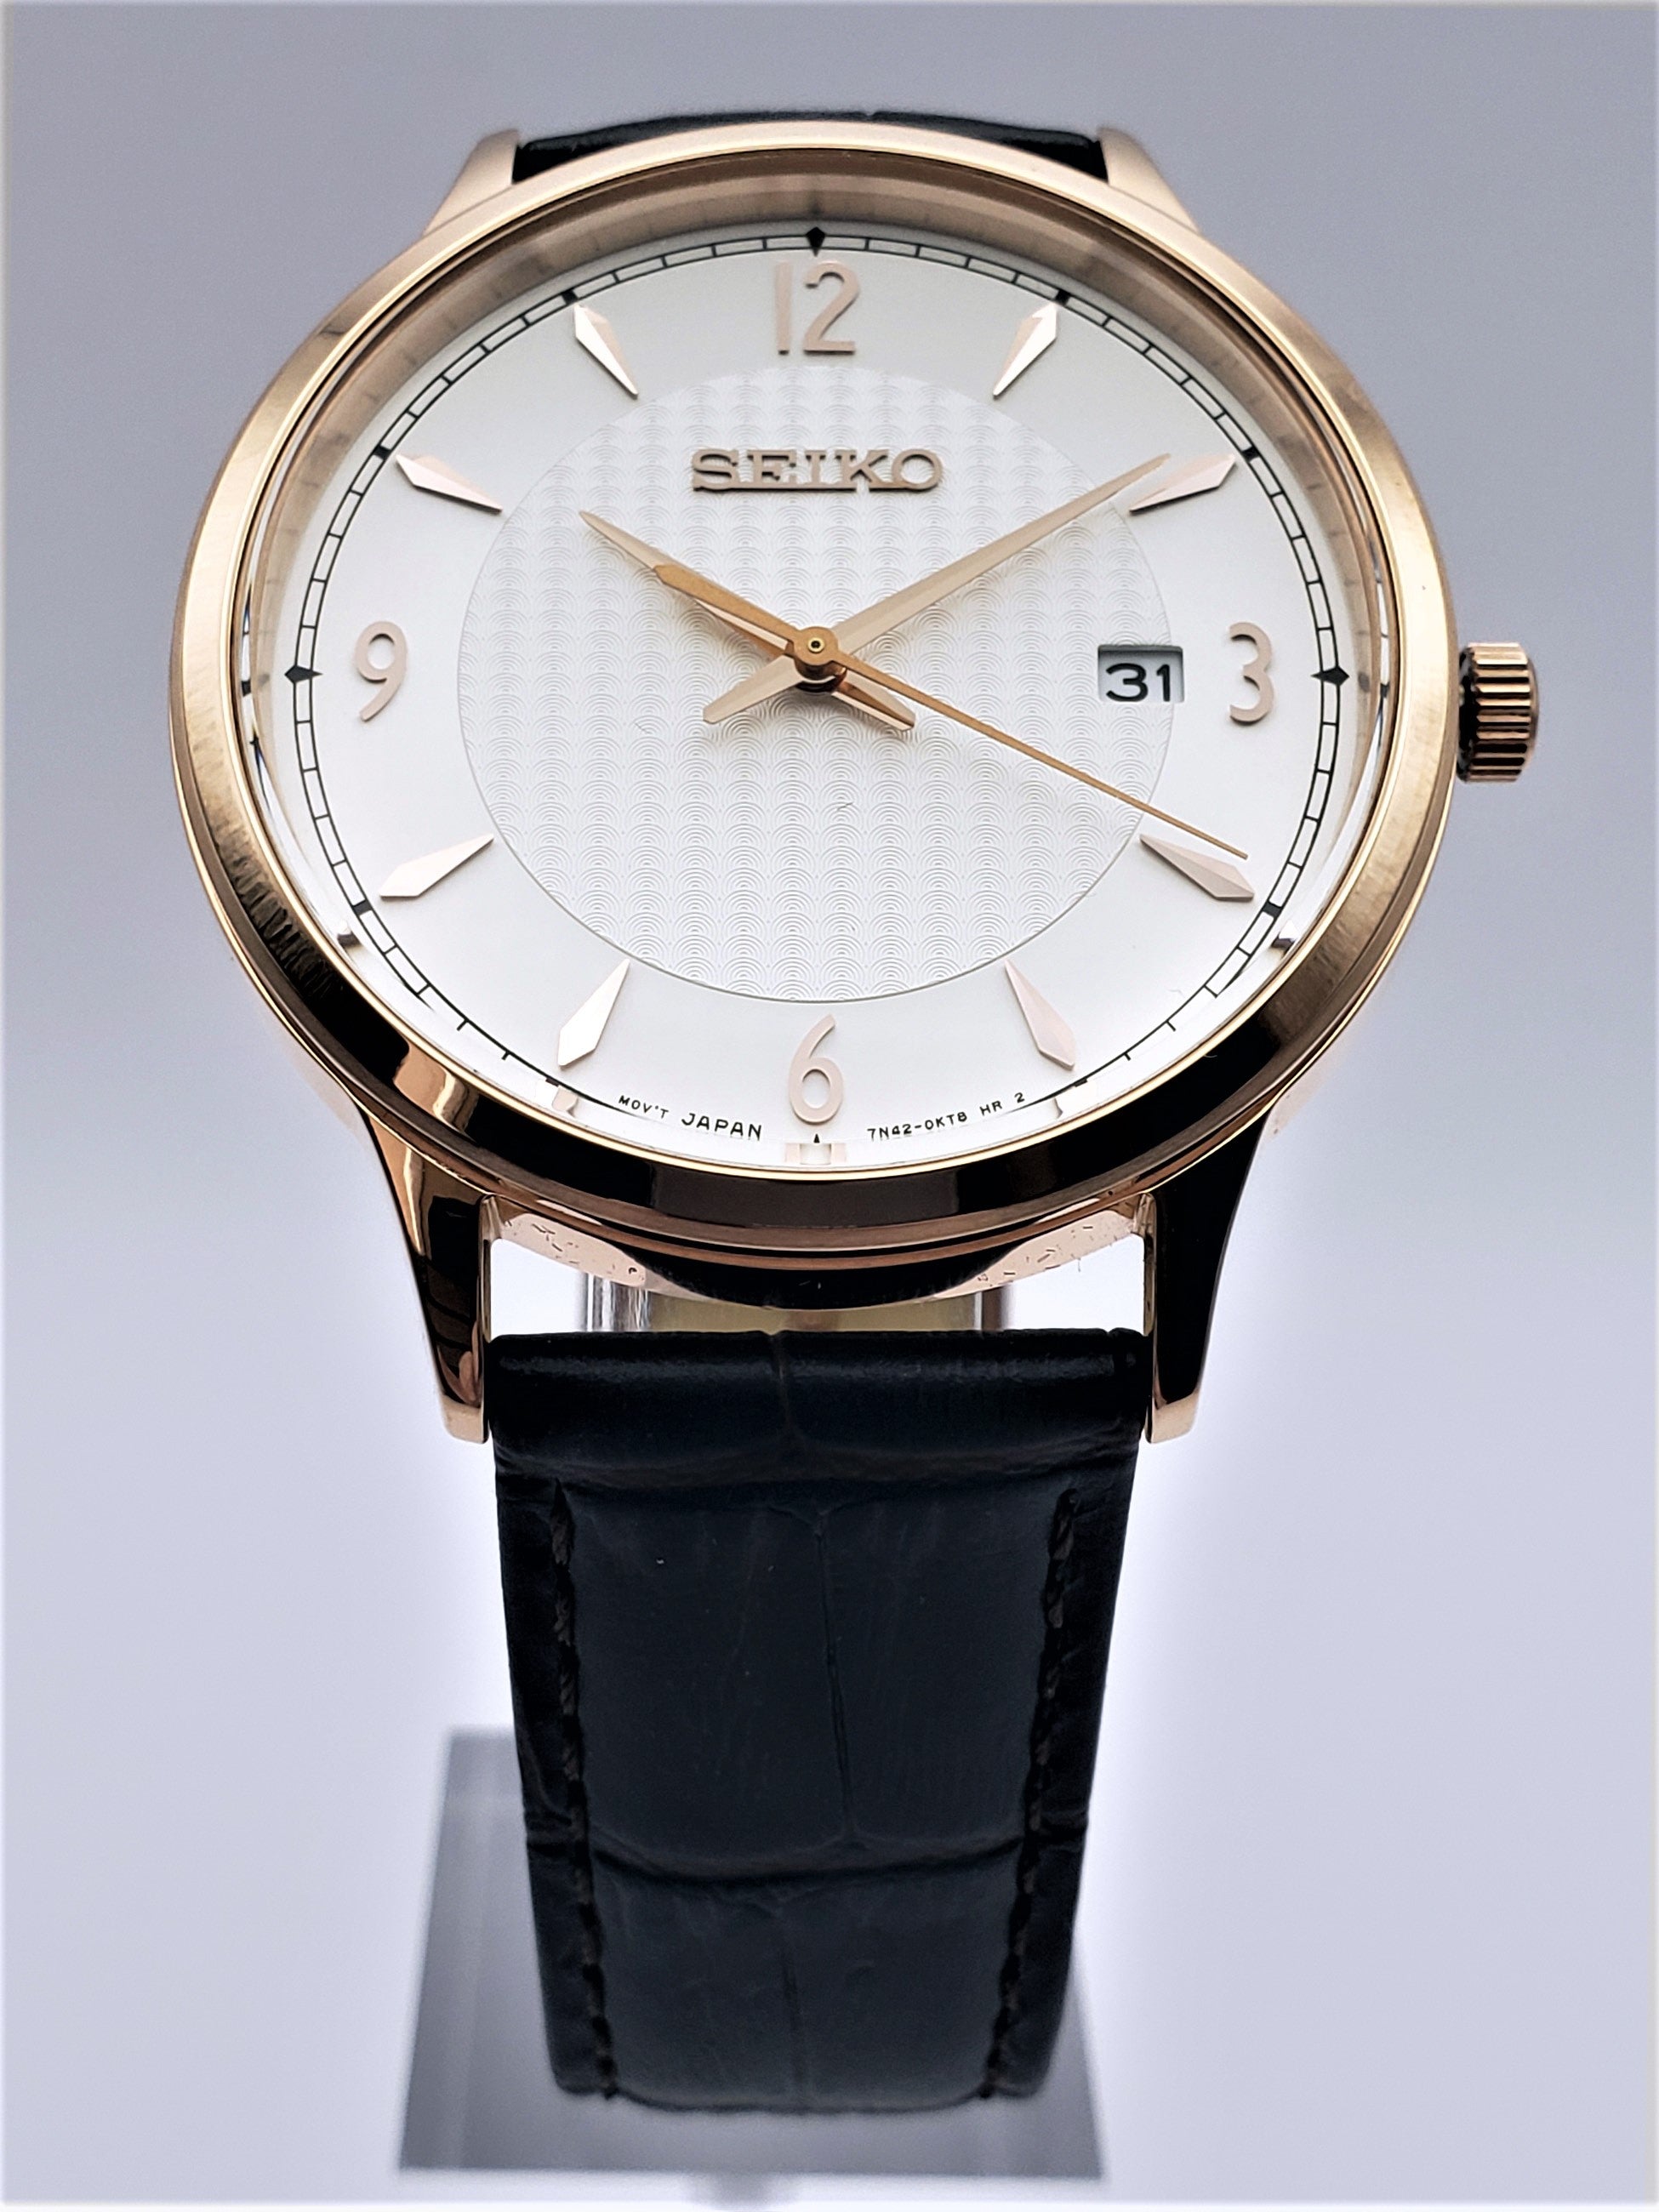 Seiko Men's Stainless Steel Dress Watch with Leather Calfskin Strap – Time  To Watch